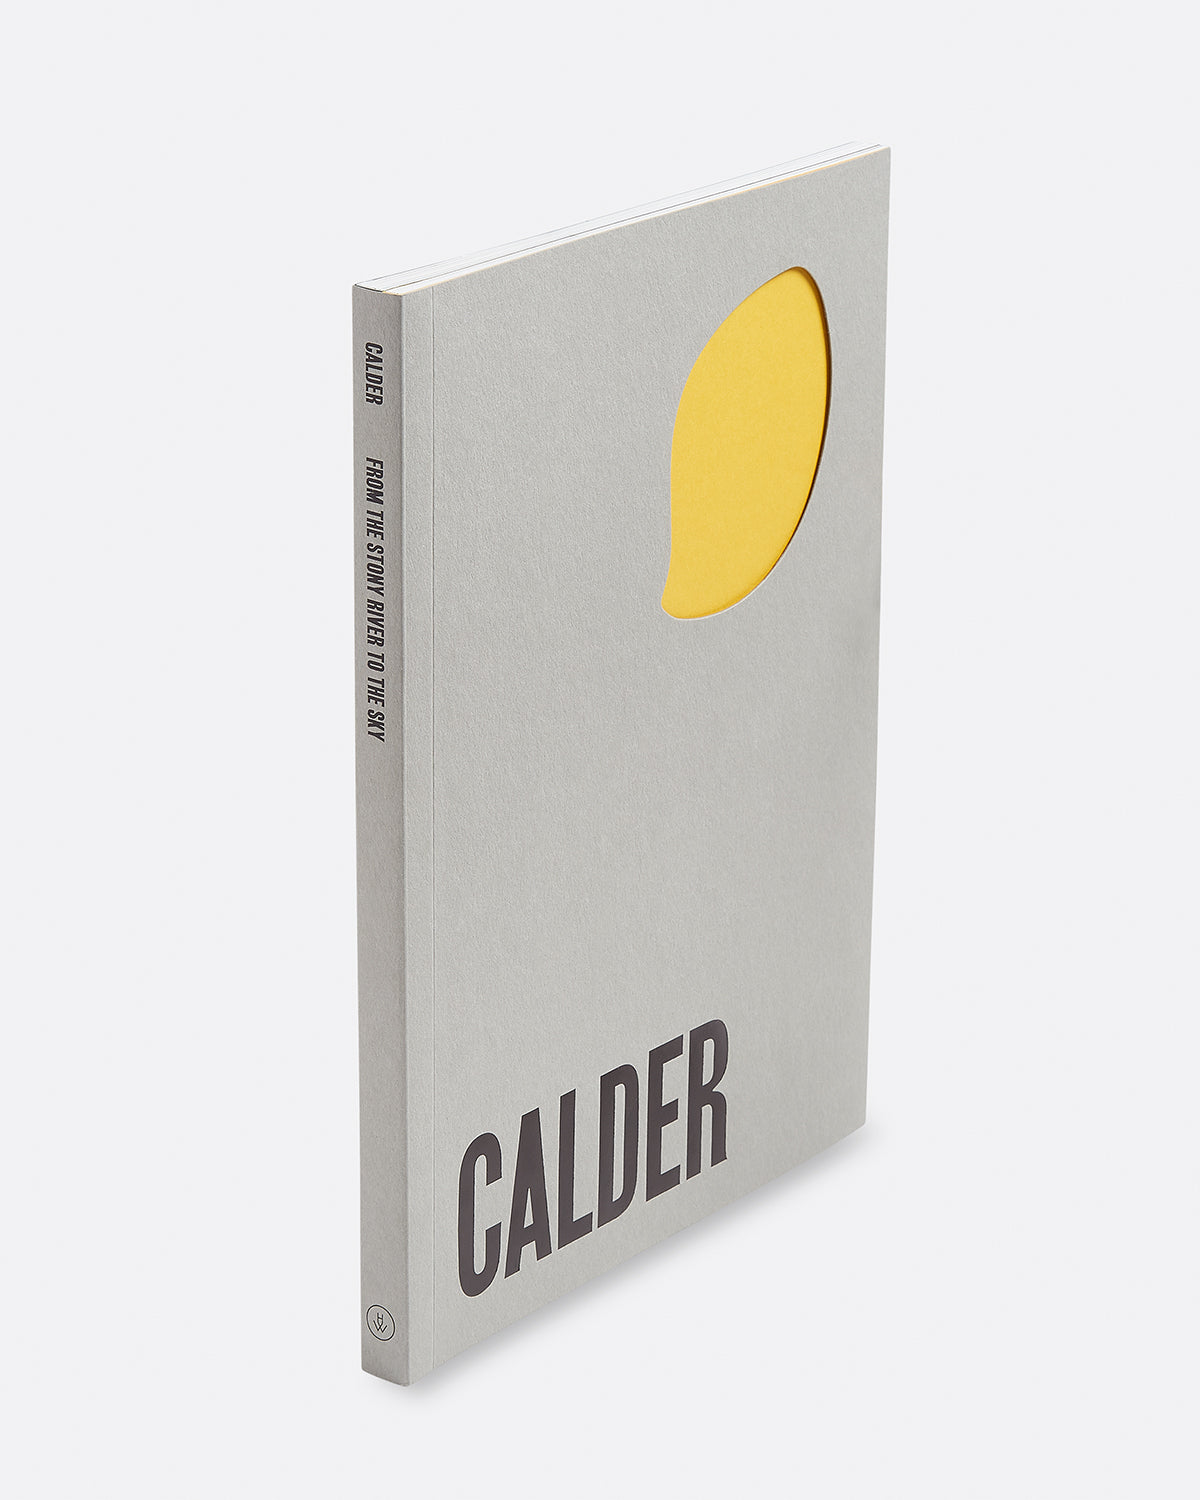 Alexander Calder: From the Stony River to the Sky Default Title